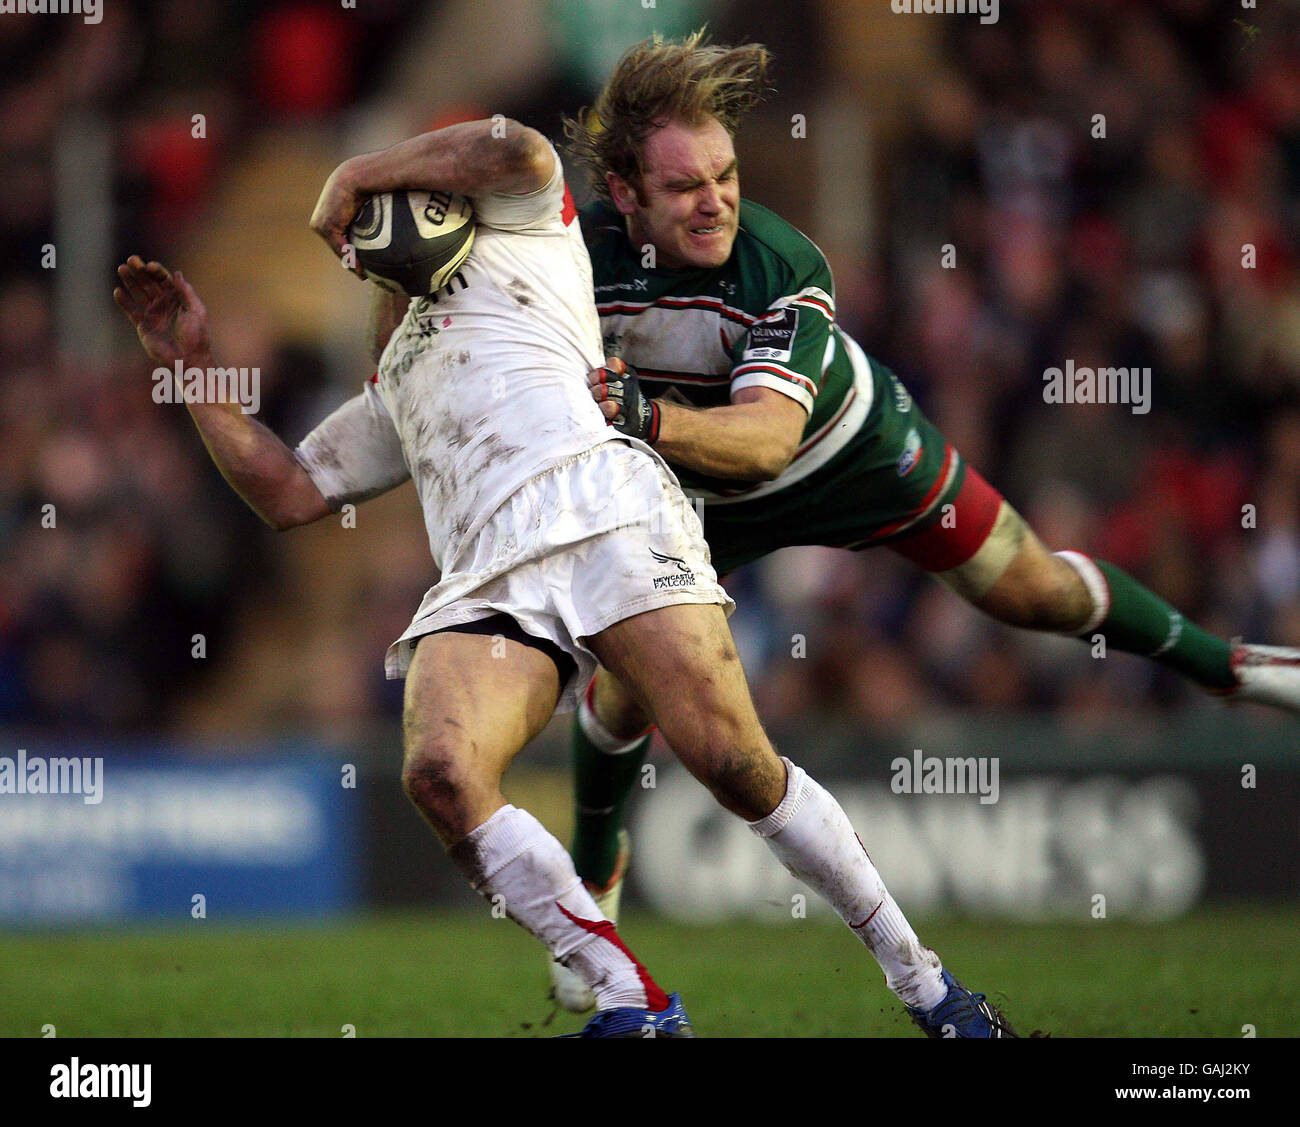 Leicester Tigers Andy Goode high tackles Newcastle Falcons Jonny Wilkinson during the Guinness Premiership match at Welford Road, Leicester Stock Photo